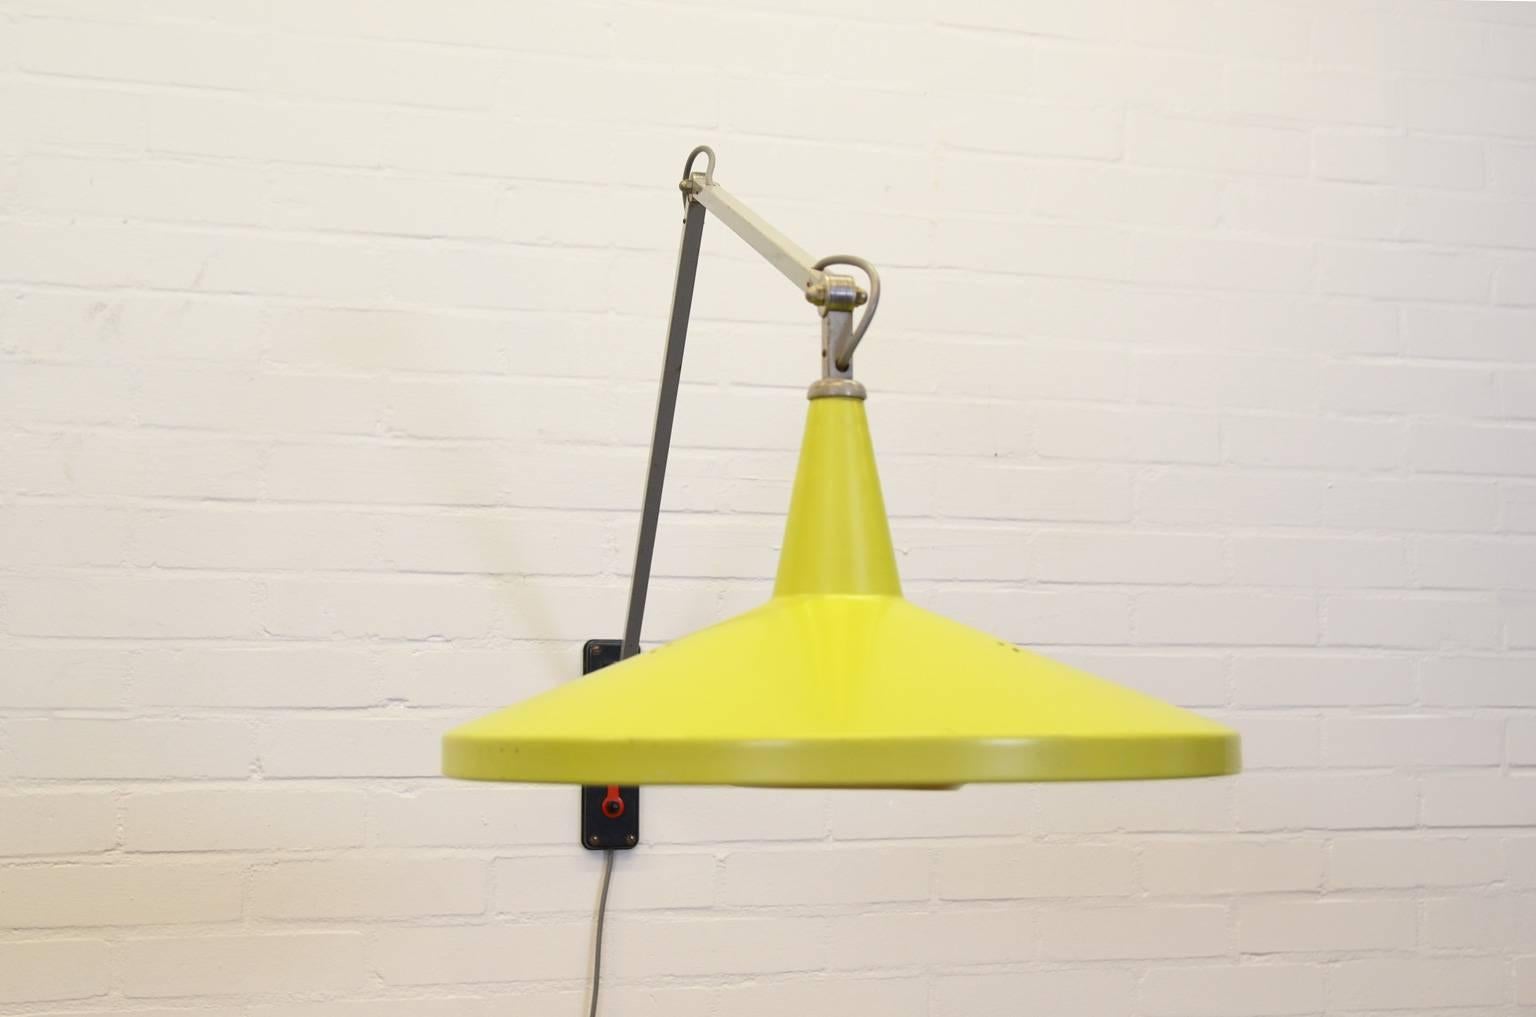 This wall lamp (model 4050) is one of the first items belonging to the Dutch Industrial Design movement and is designed by Wim Rietveld for Gispen. The lamp is adjustable in many positions due to three pivot points. The lamp spreads warm light by